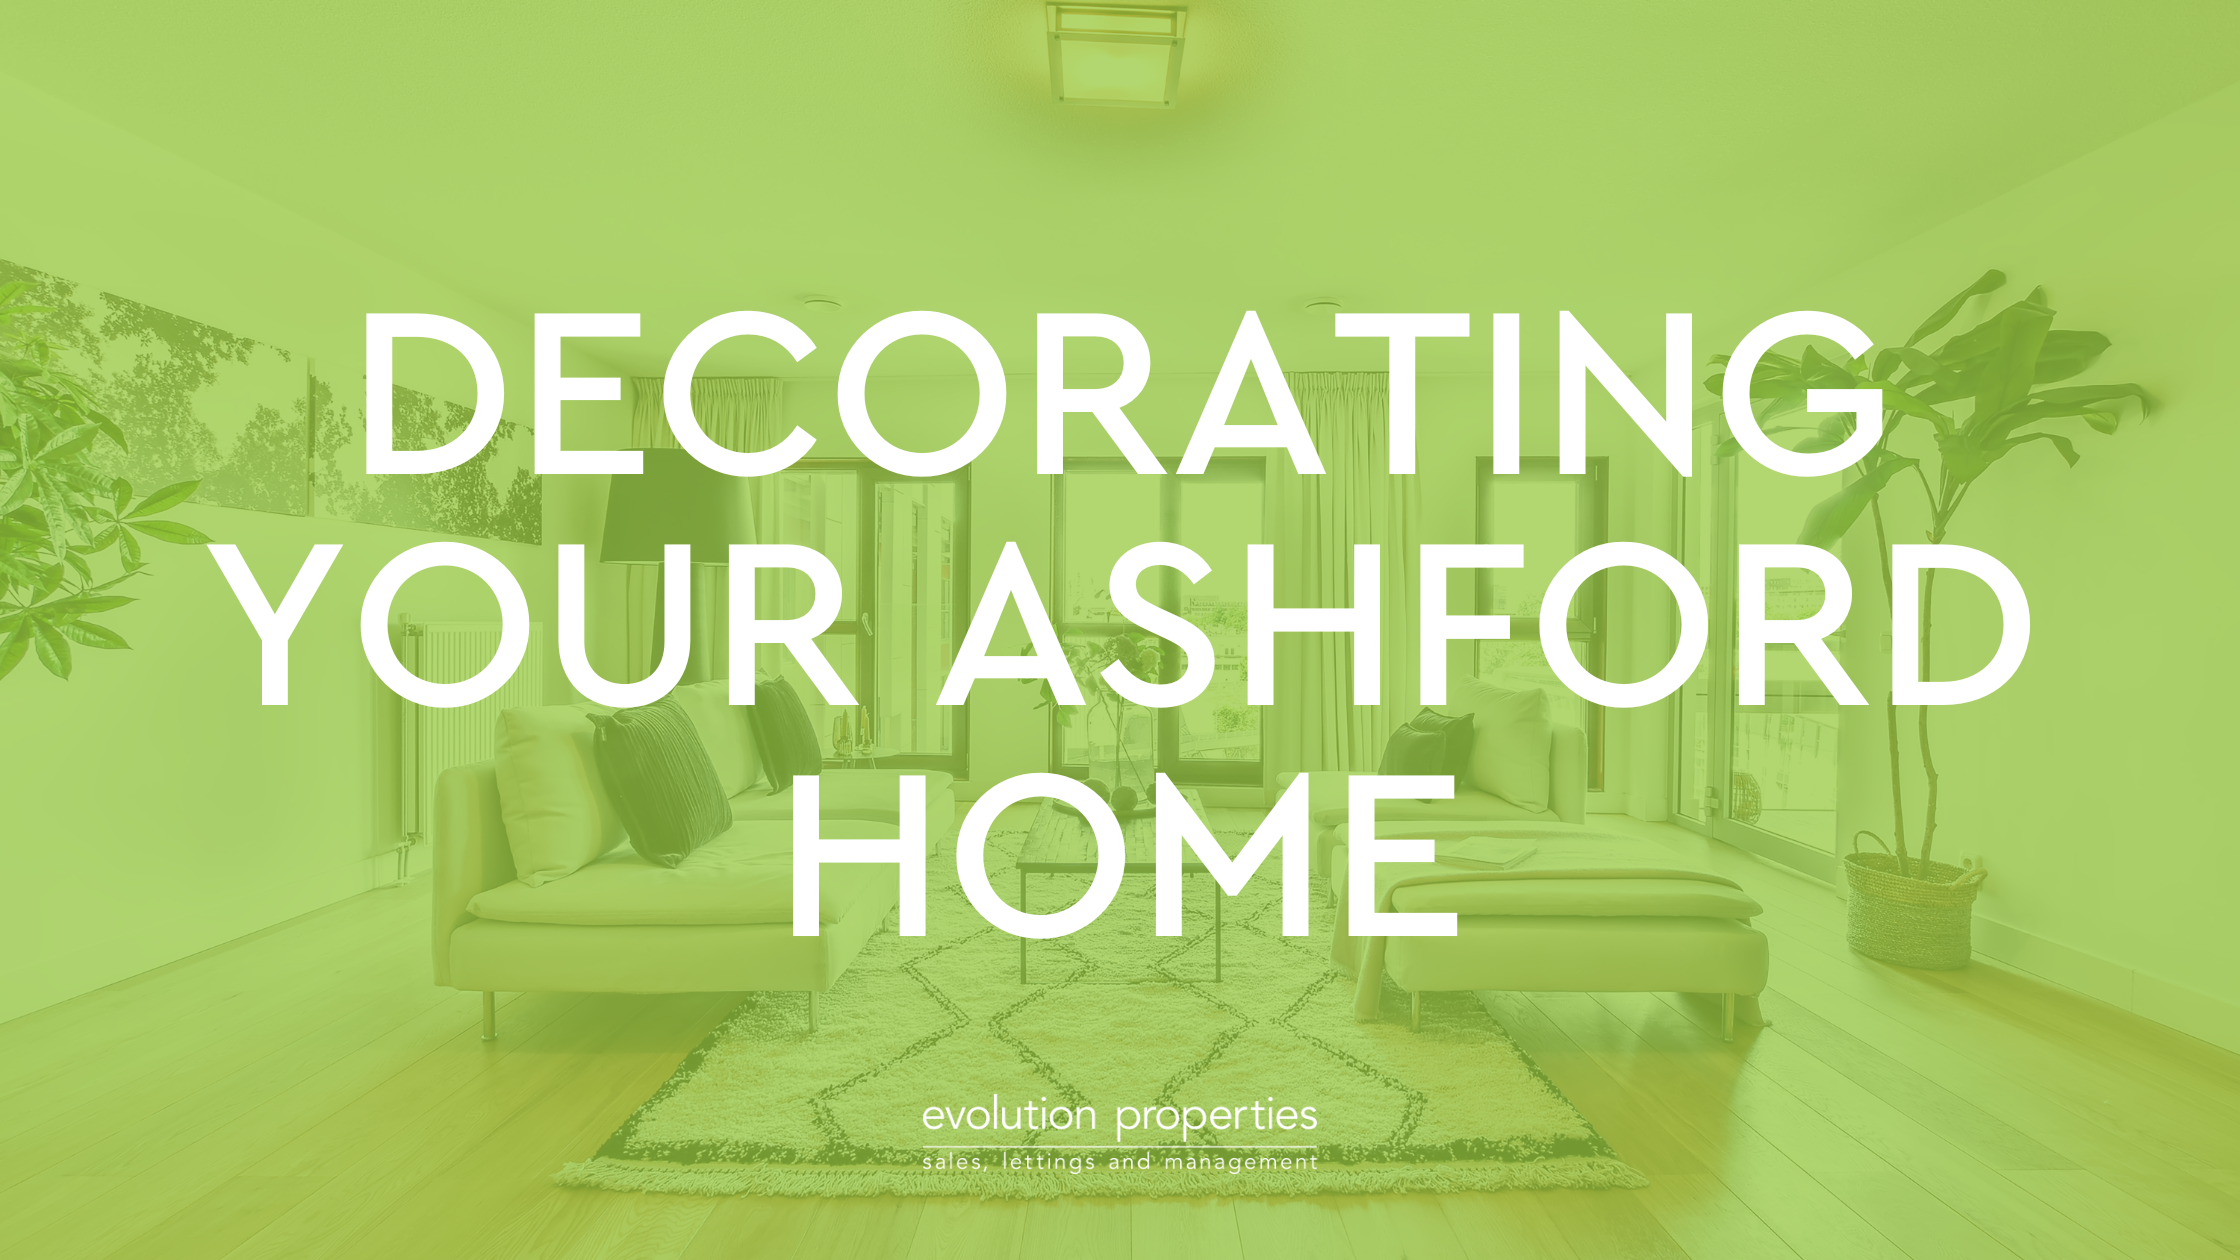 Decorating your ashford home